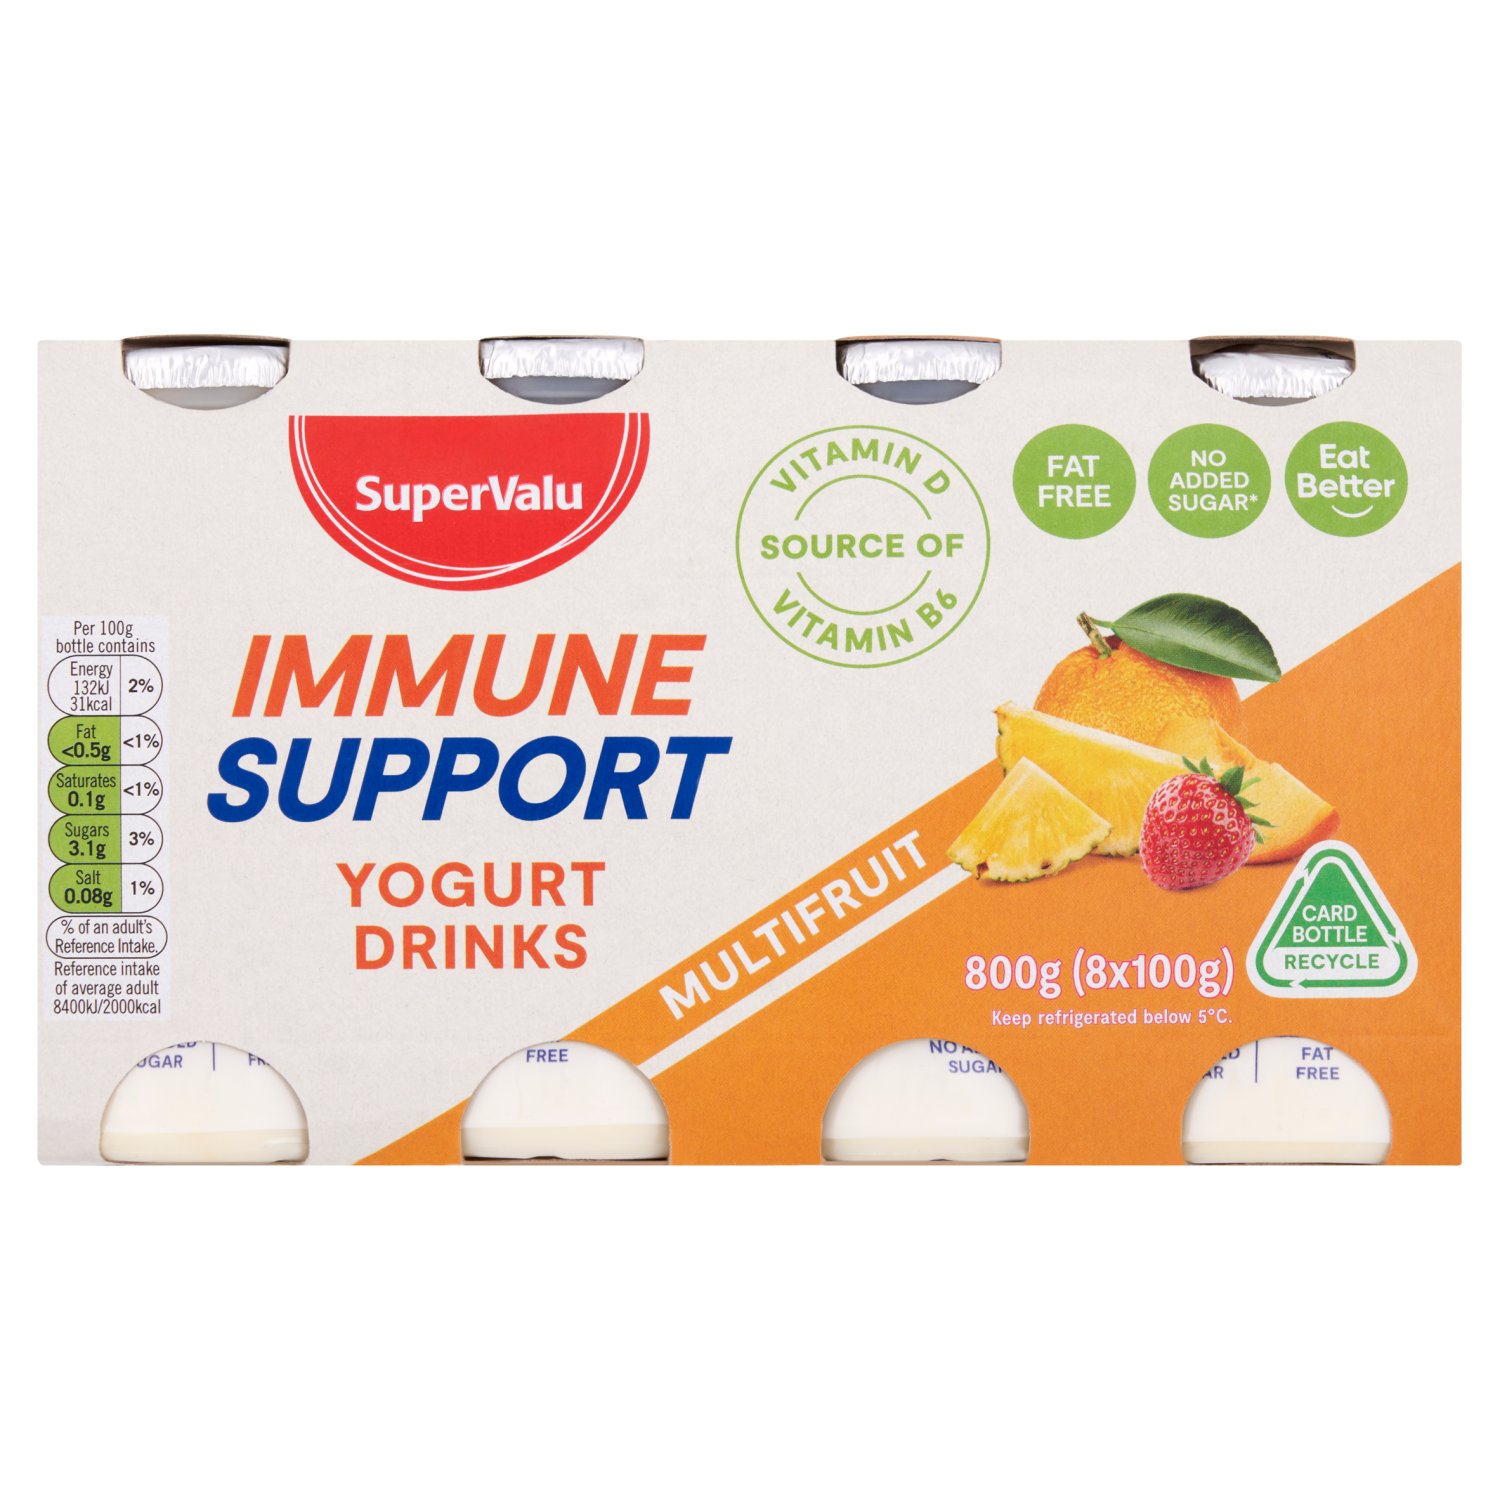 No added sugar*
*Contains naturally occurring sugars

Vitamin B6 & D contributes to the normal function of the immune system.
Vitamin D also contributes to the maintenance of normal teeth and bones.
Vitamin B6 also contributes to the reduction of tiredness and fatigue.